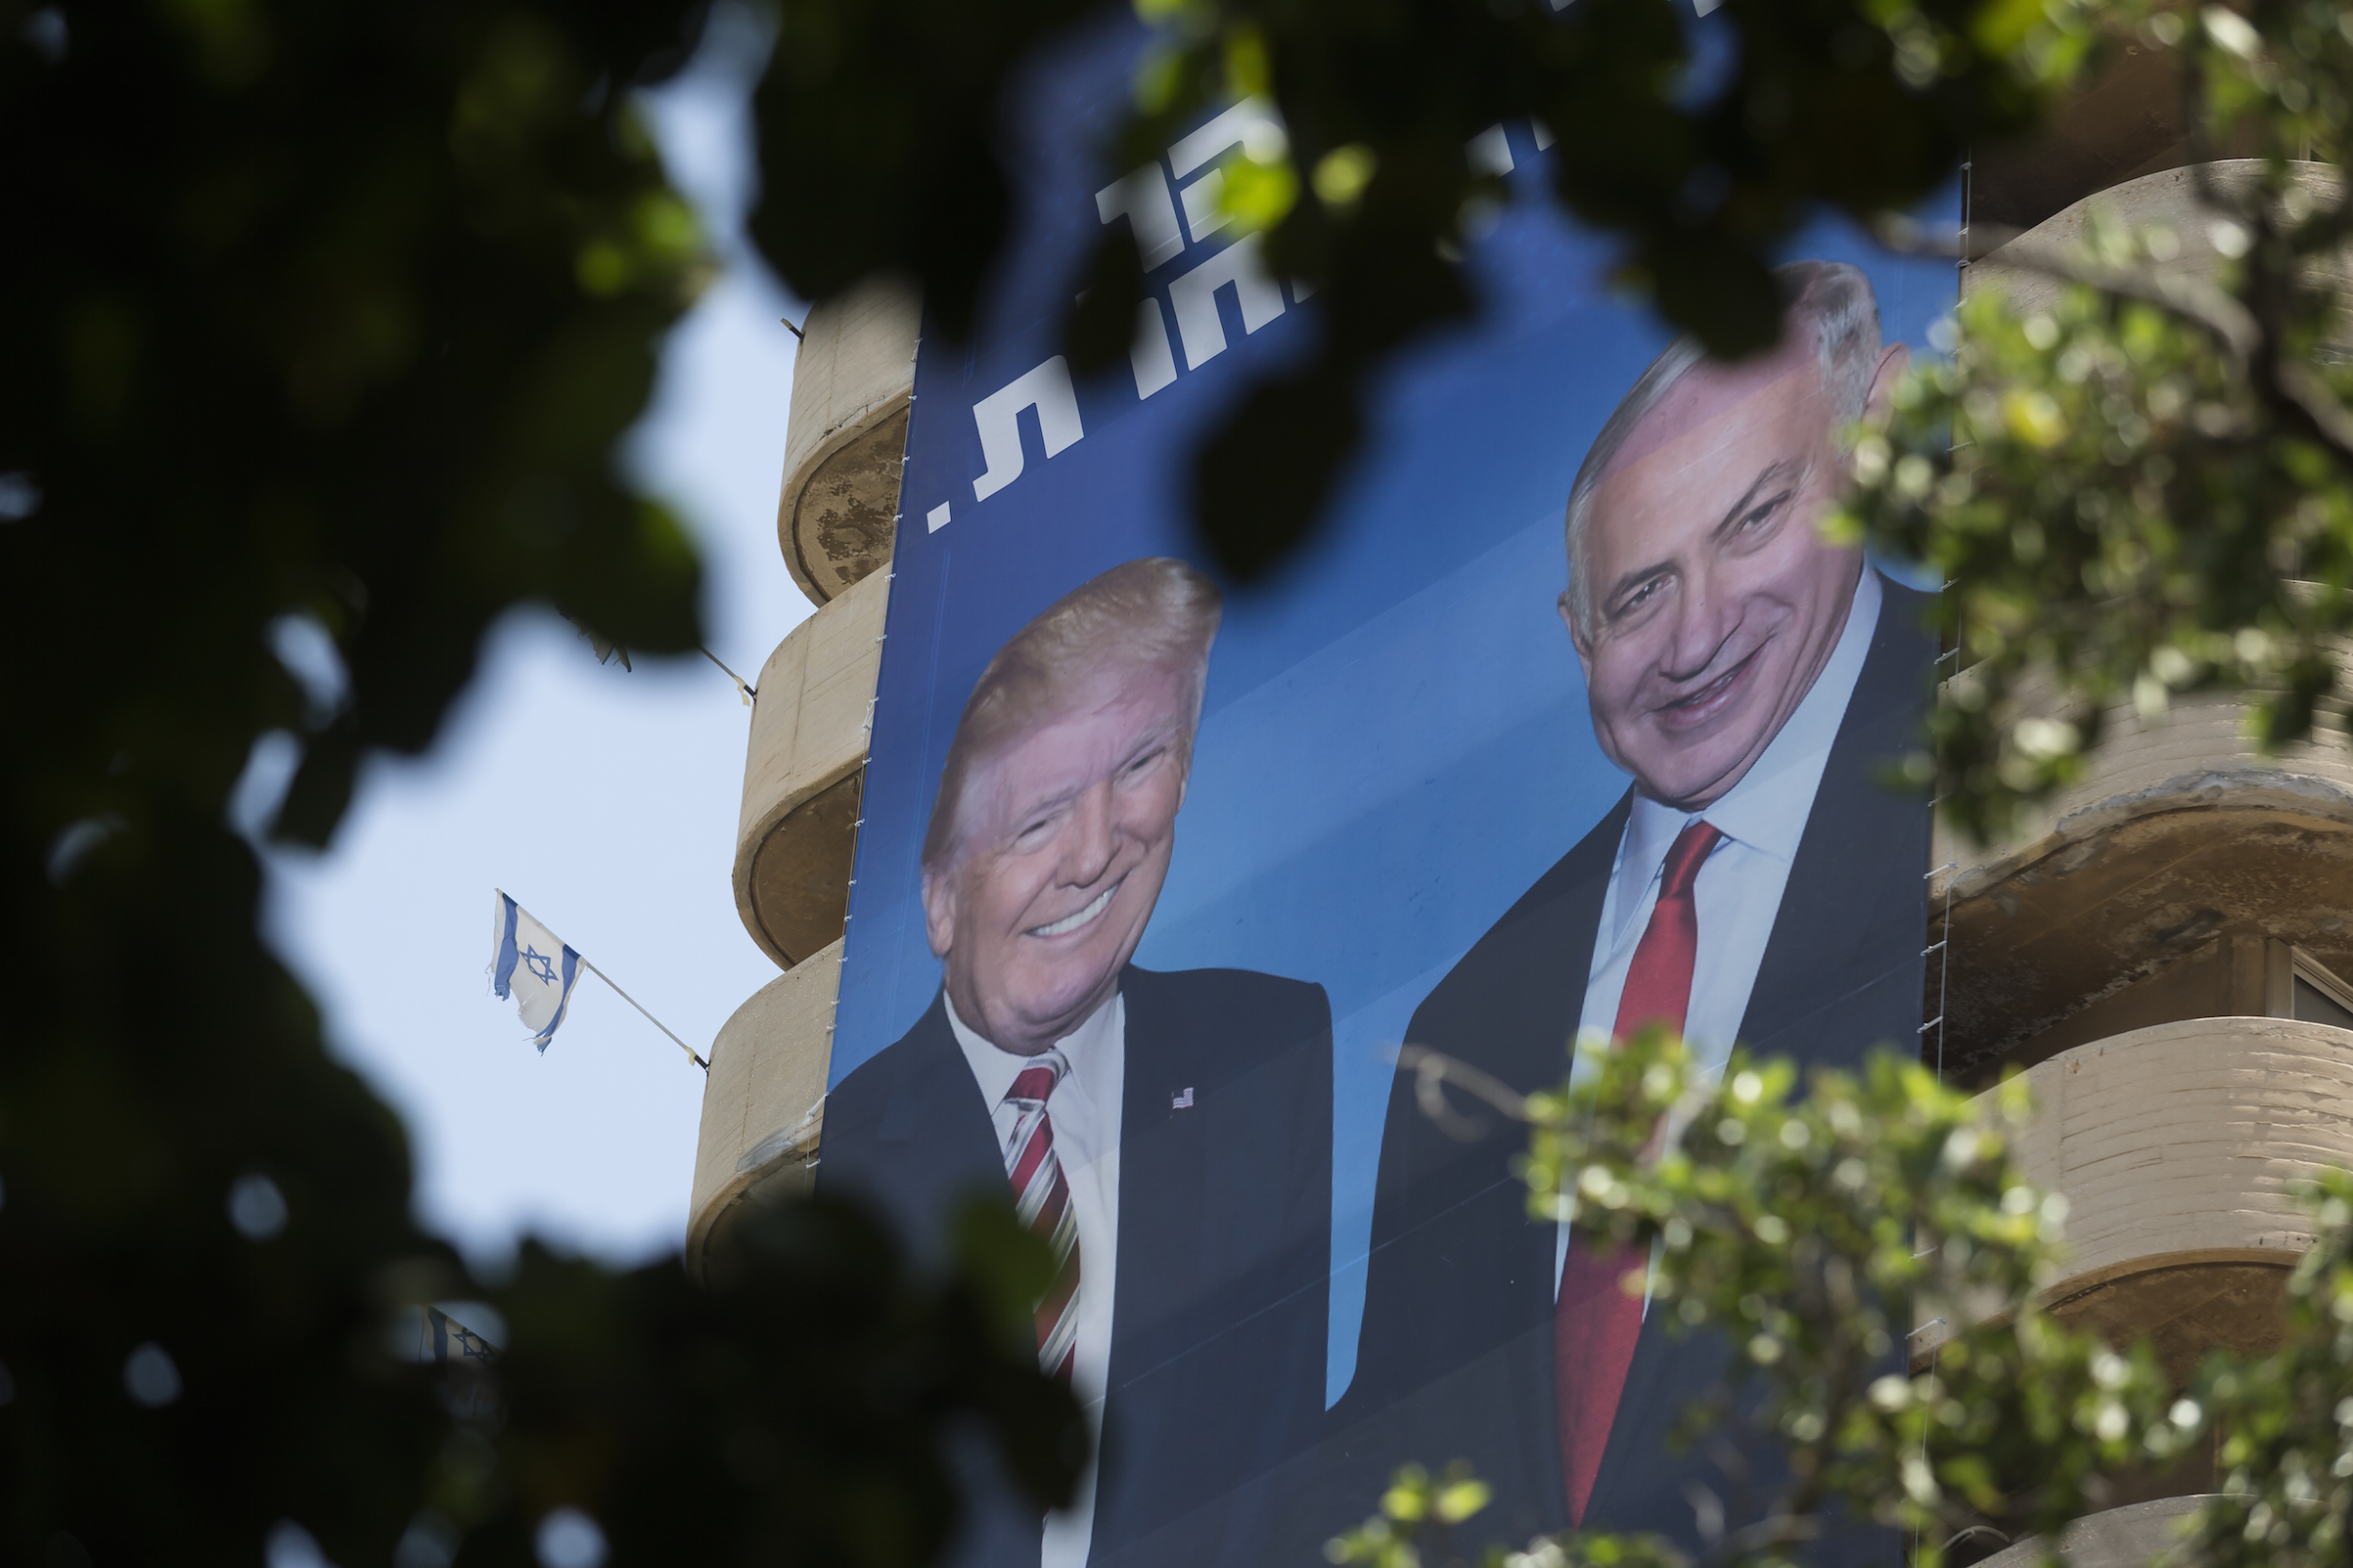 A Likud Party billboard shows Israeli Prime Minister Benjamin Netanyahu with U.S. President Donald Trump on Aug. 5, 2019 in Tel Aviv, shortly before elections there. (Amir Levy—Getty Images)